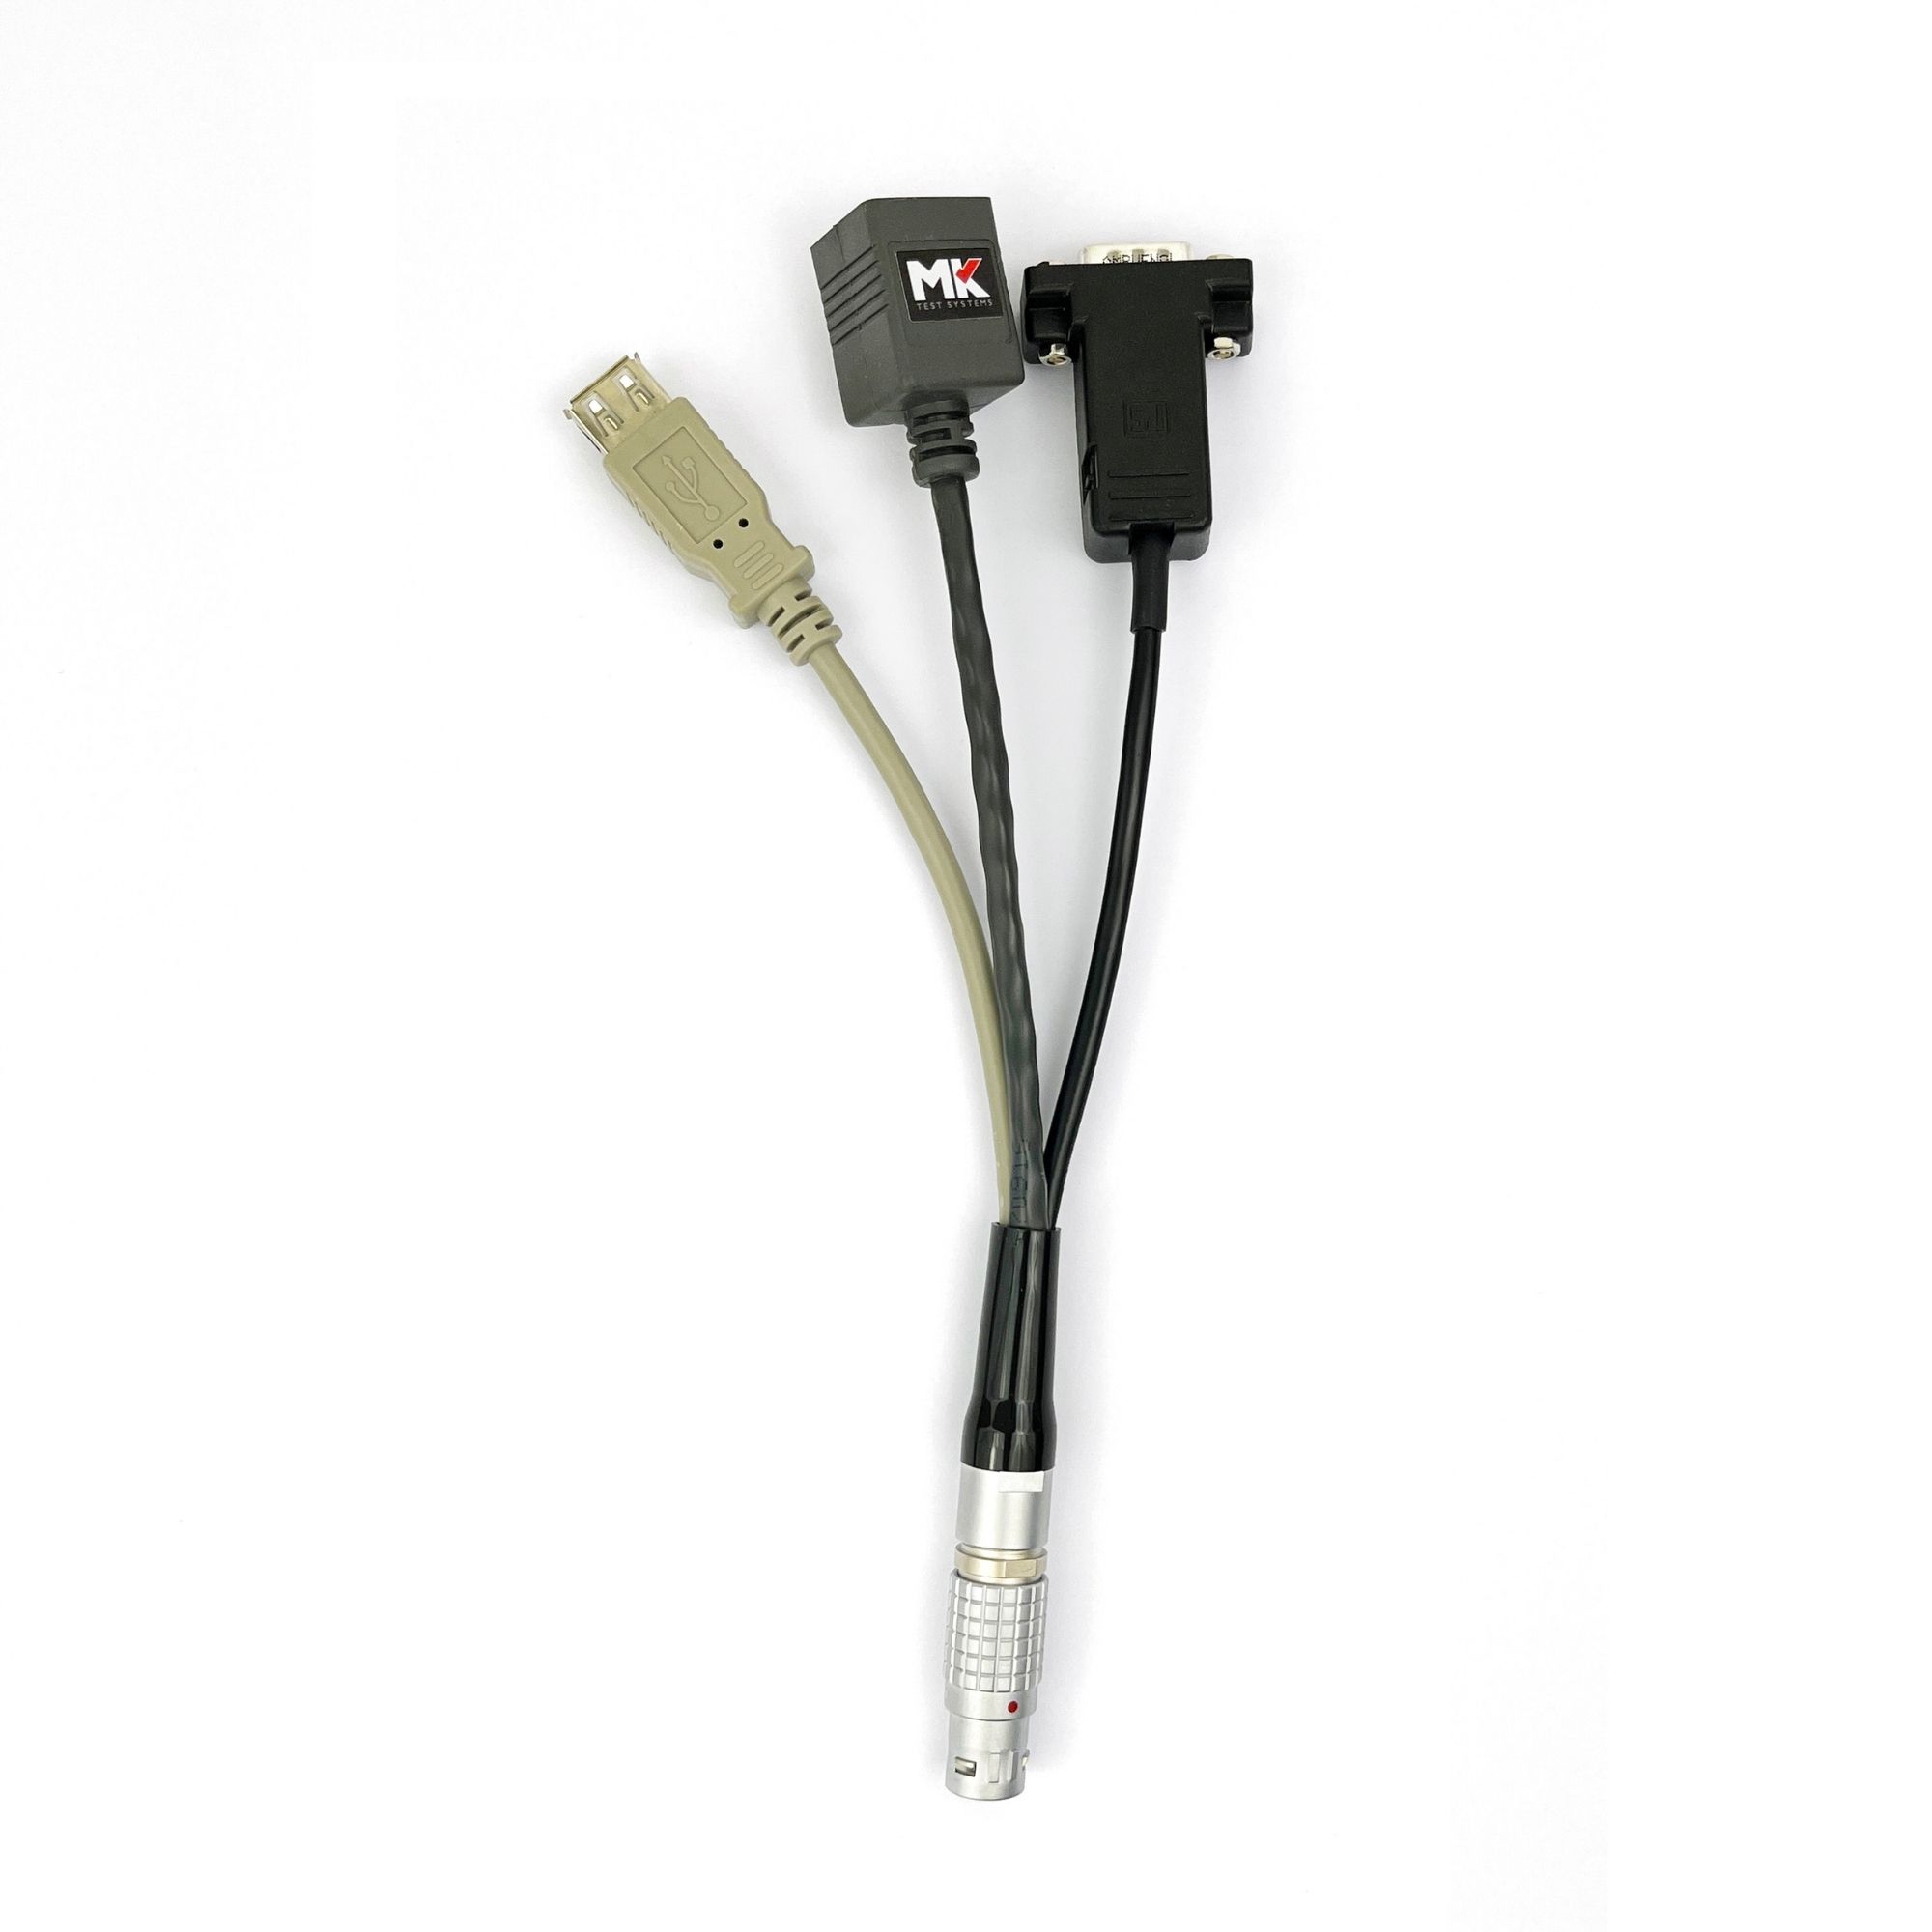 Data adaptor cable